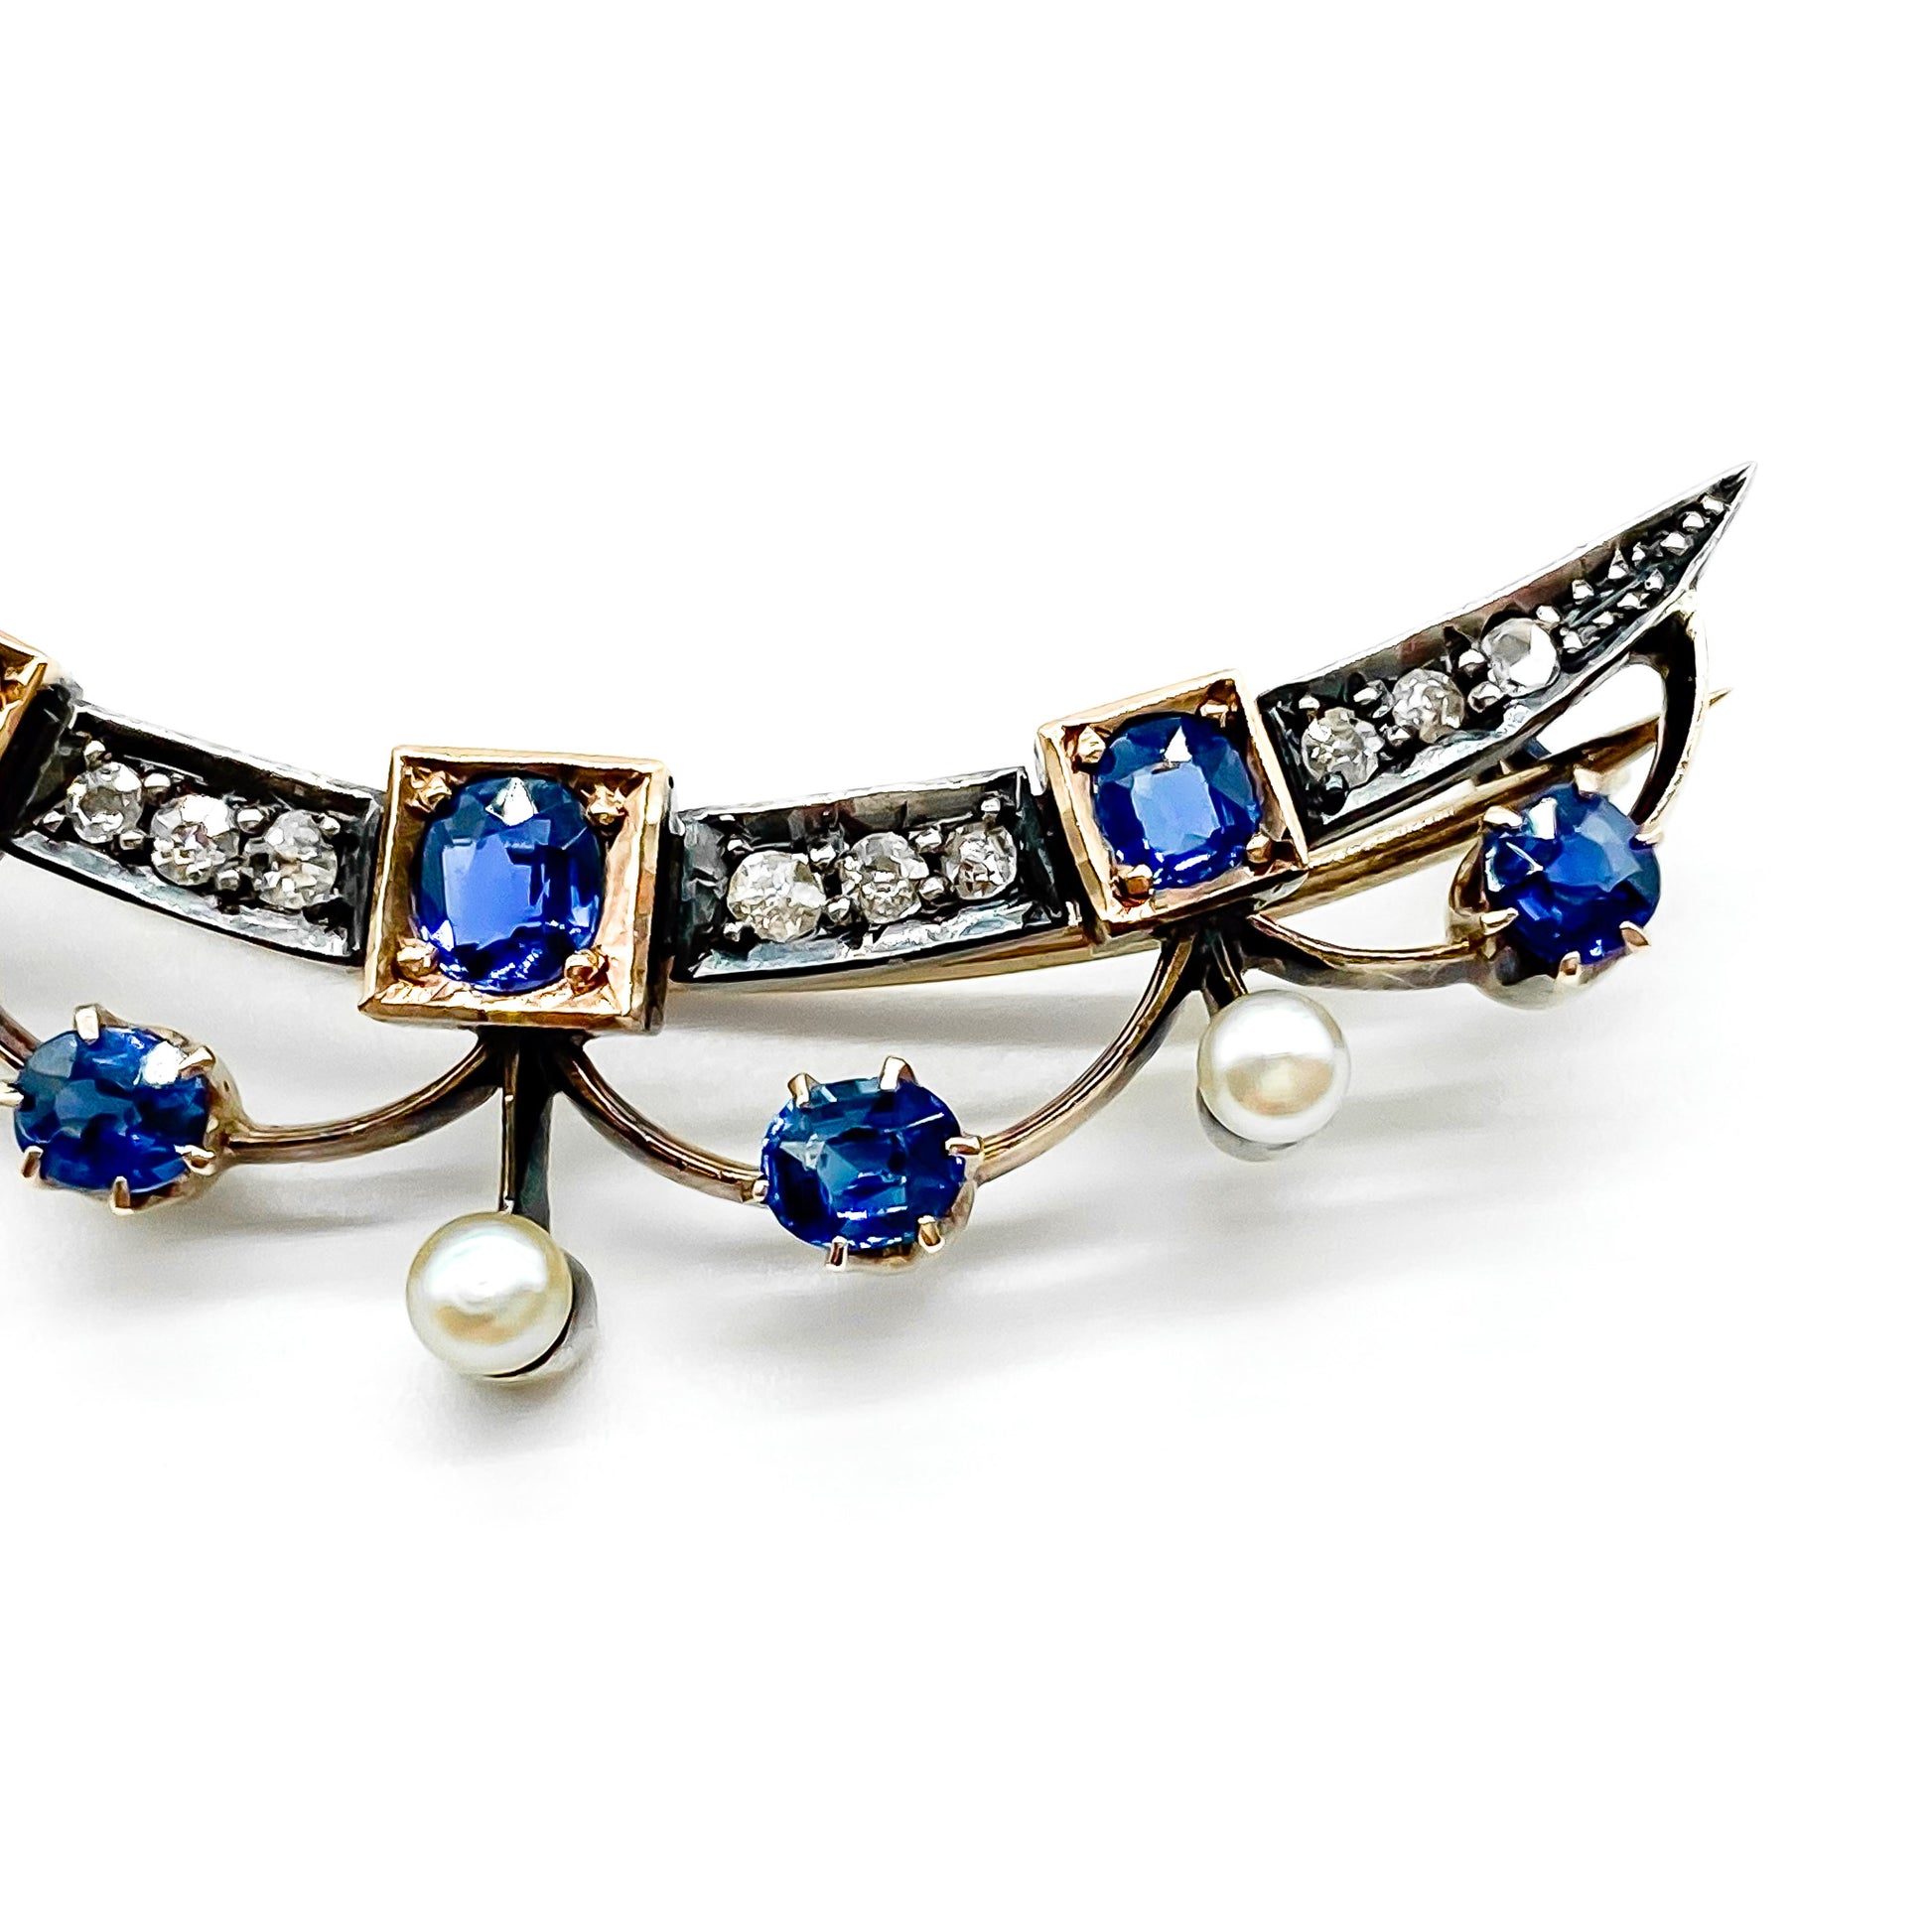 Very pretty Victorian 9ct rose gold and silver crescent brooch set with cornflower blue sapphires, diamonds and seed pearls.